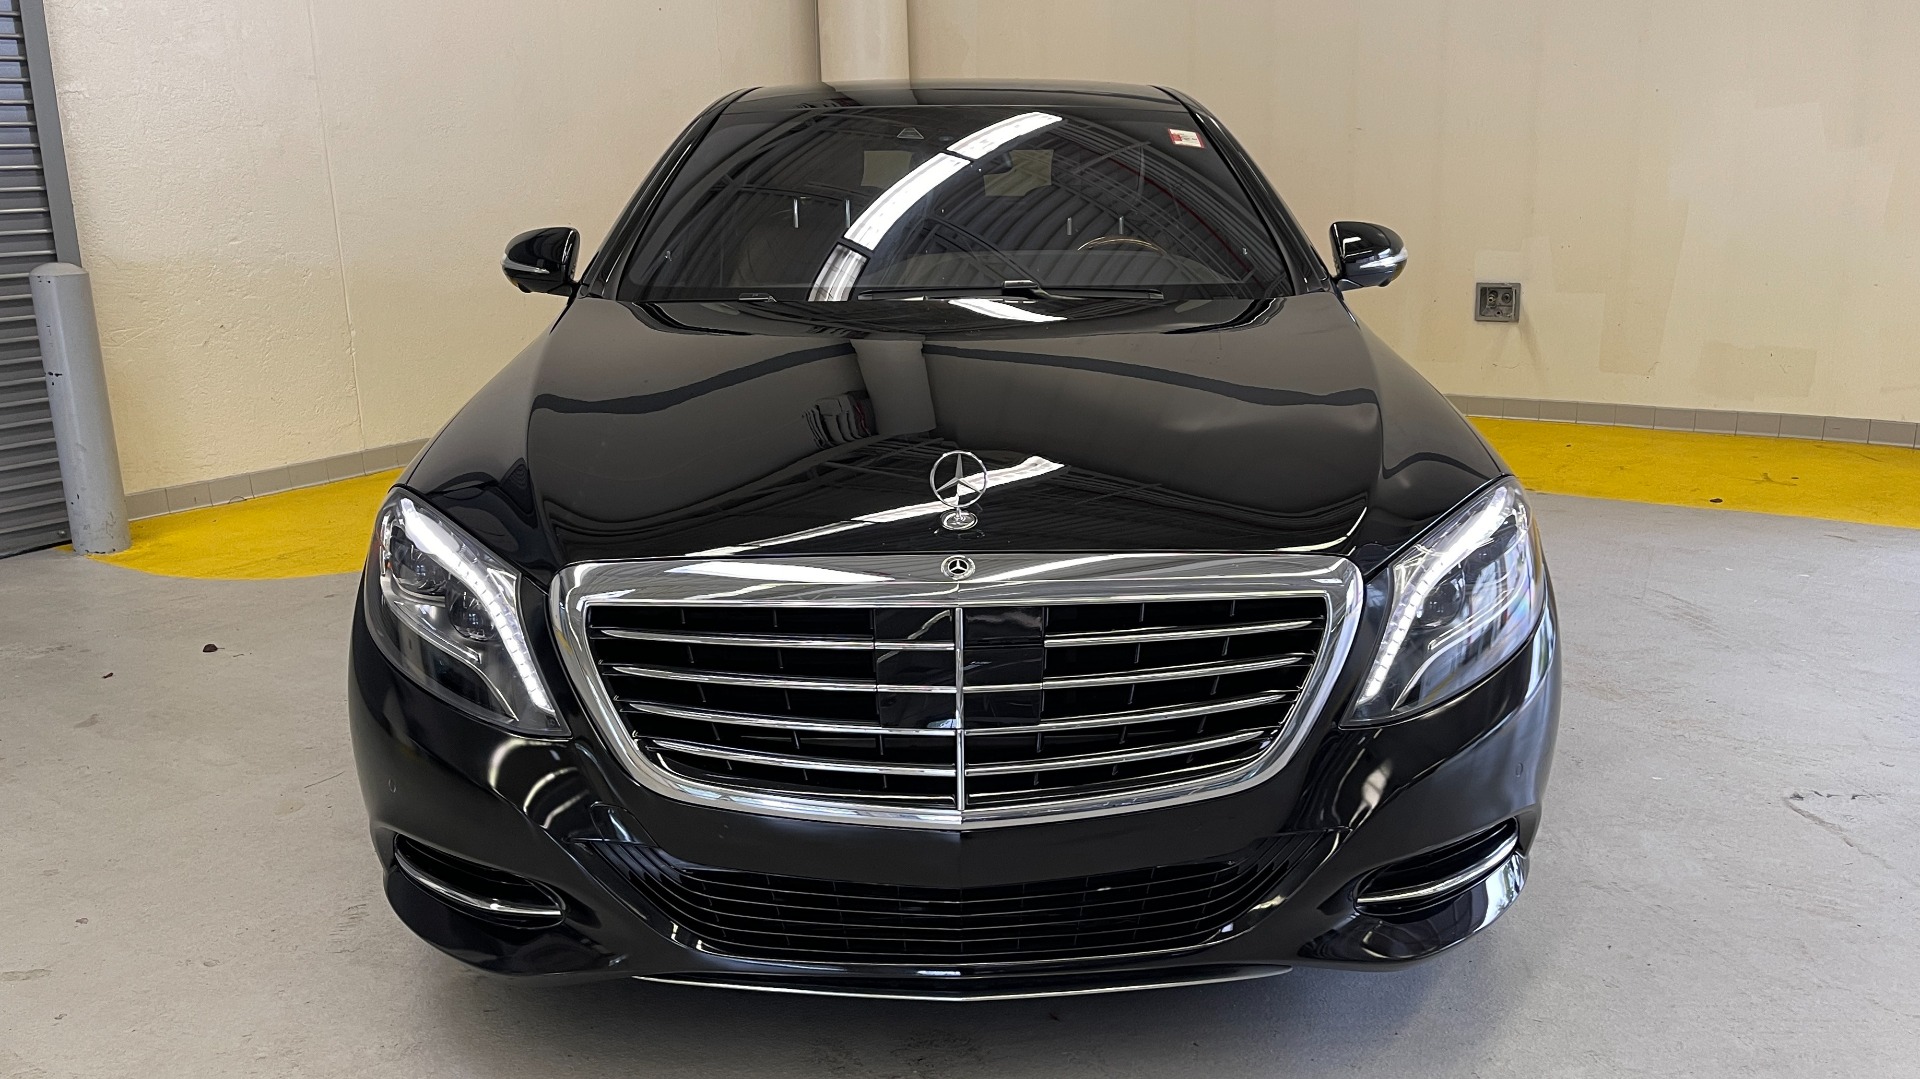 Used 2017 Mercedes-Benz S-CLASS S 550 4MATIC PREMIUM / NAV / BURMESTER / SUNROOF / REARVIEW for sale Sold at Formula Imports in Charlotte NC 28227 11